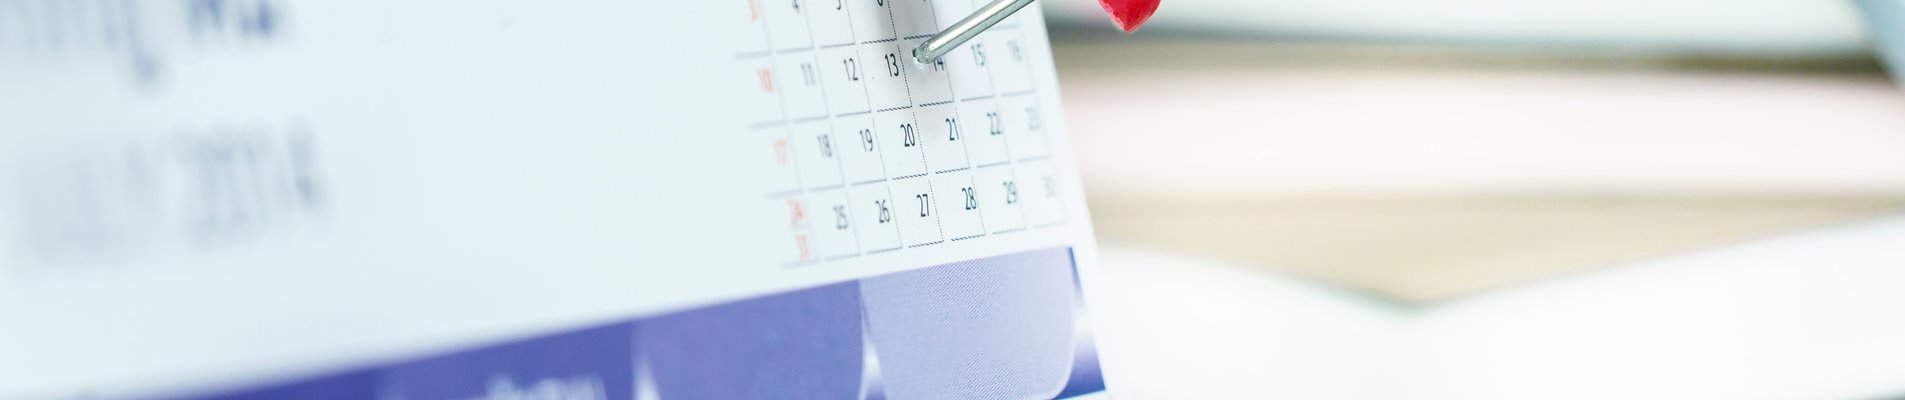 Red pushpin on calendar page for remind and marked important events